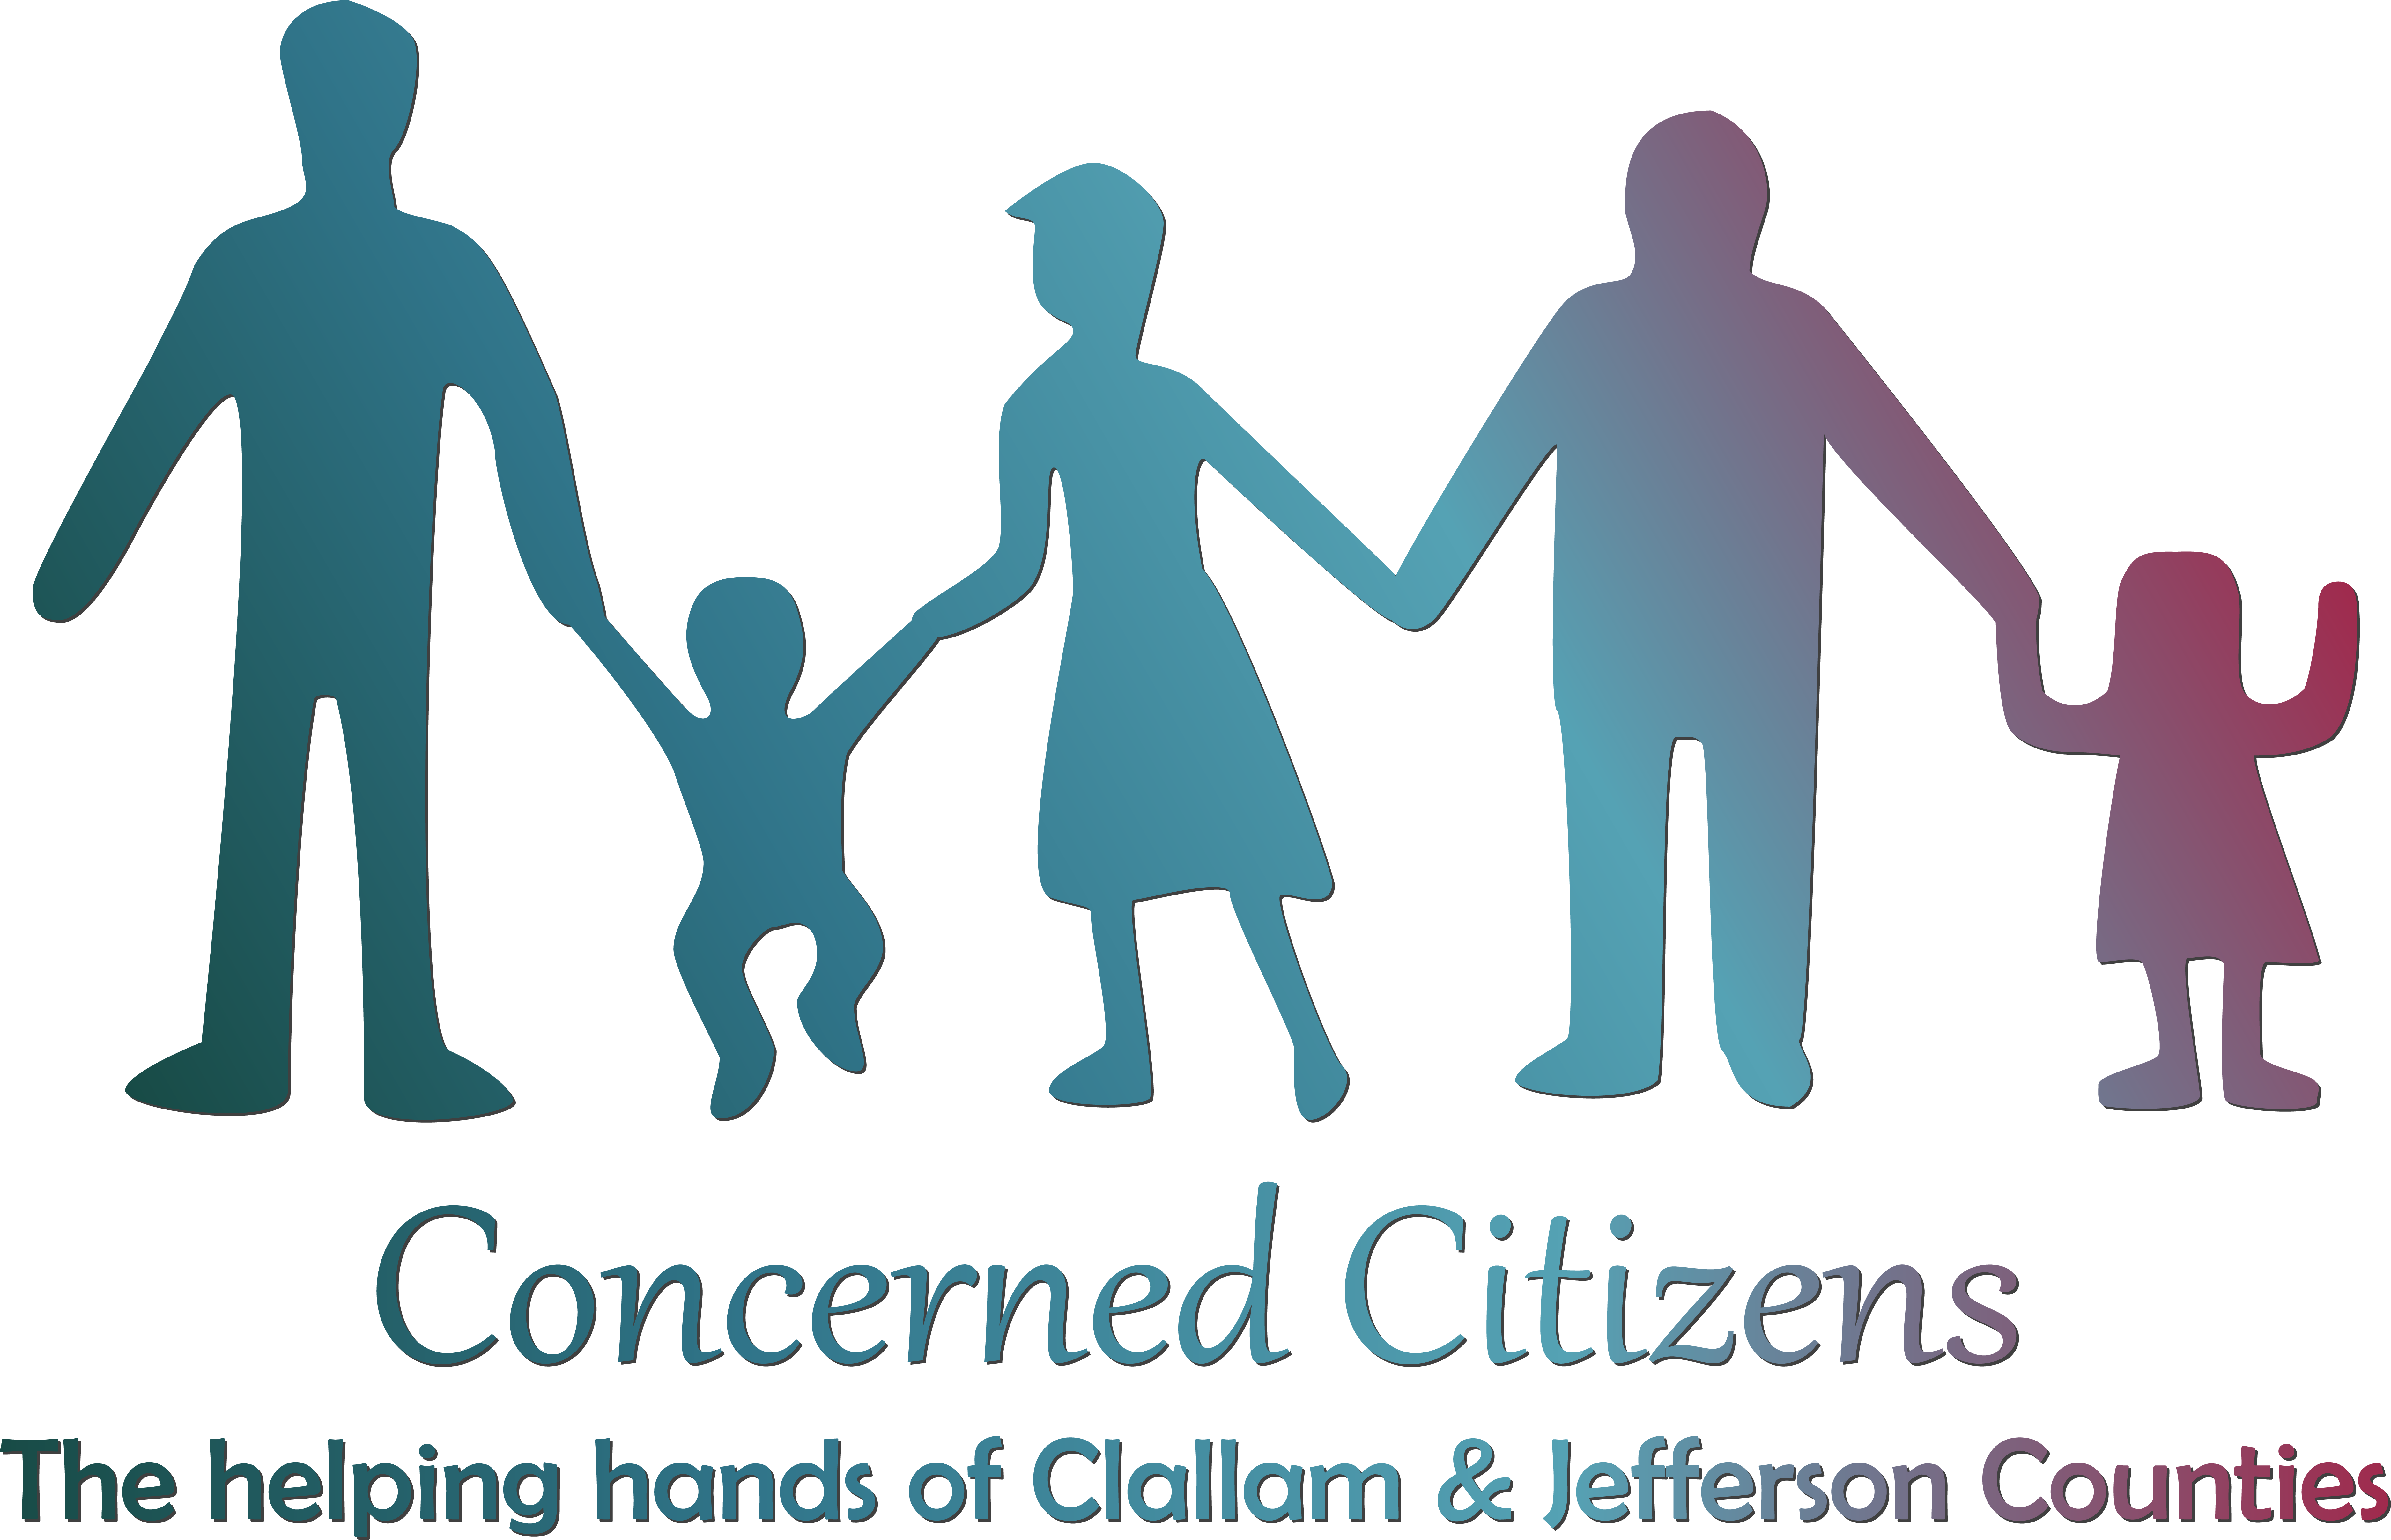 Concerned Citizens, a nonprofit social services agency, provides helping hands and community resources to community members throughout Clallam and Jefferson Counties.